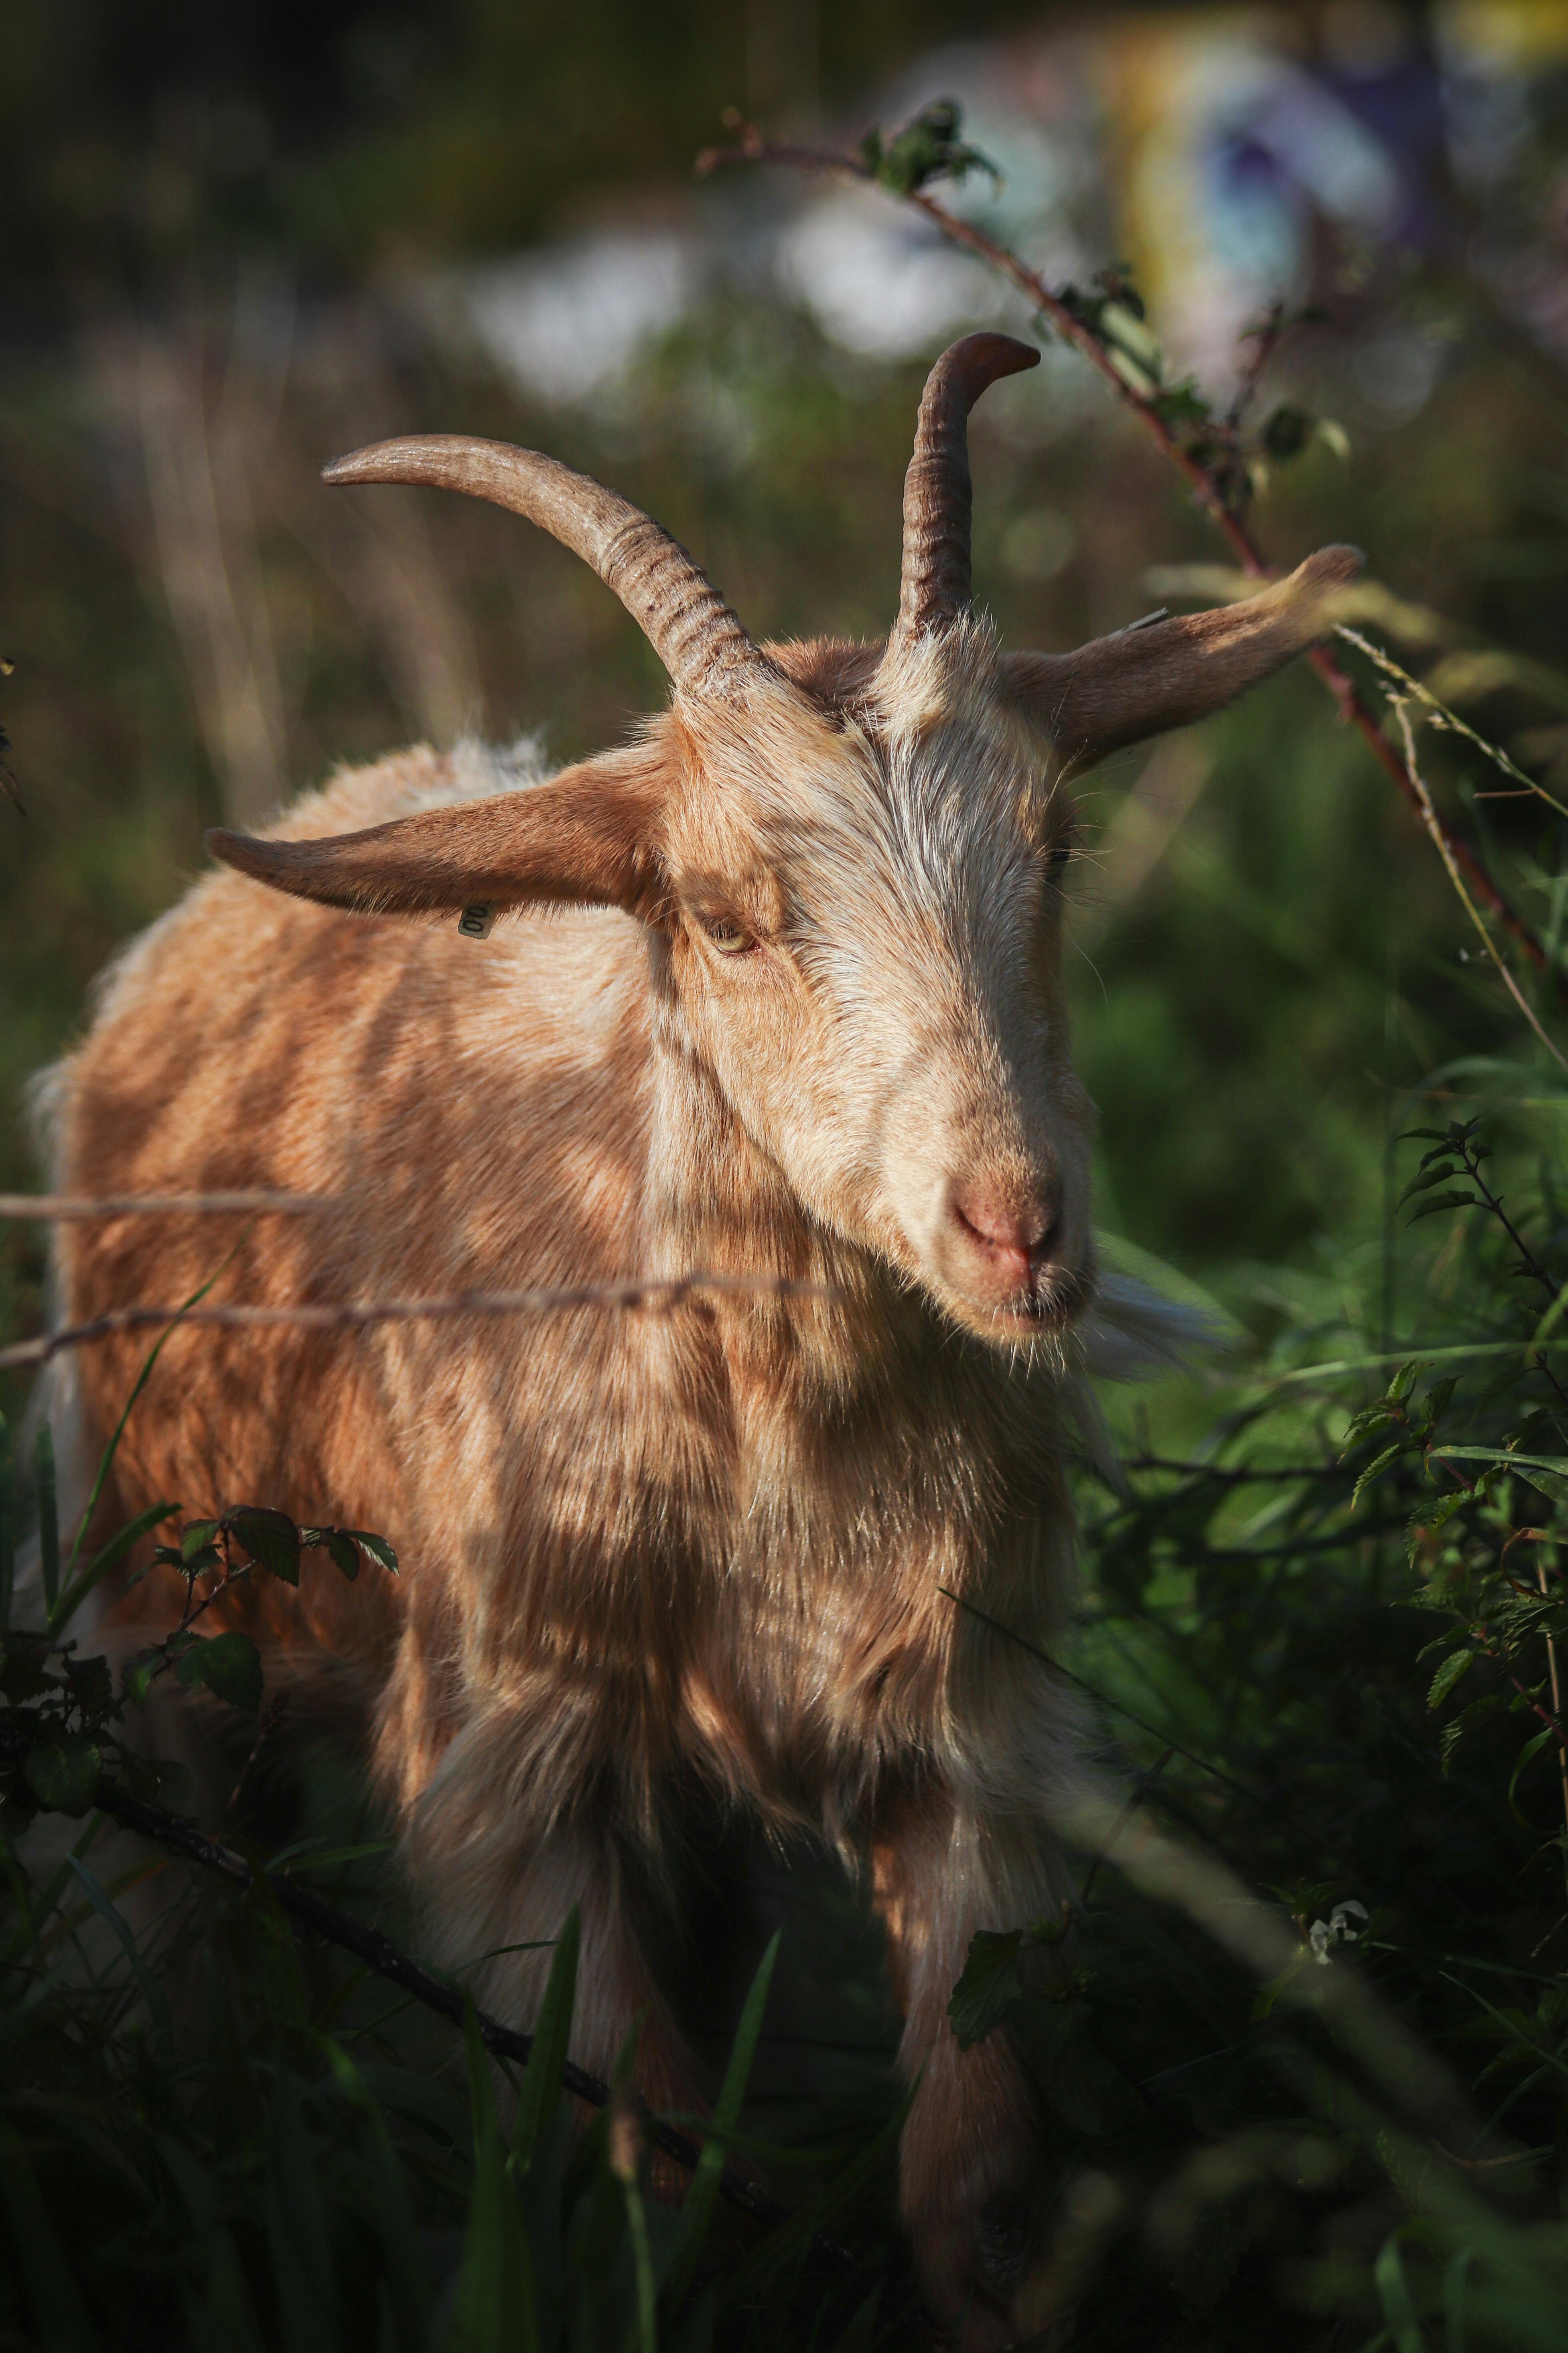 A huge goat with horns. | Source: Pexels